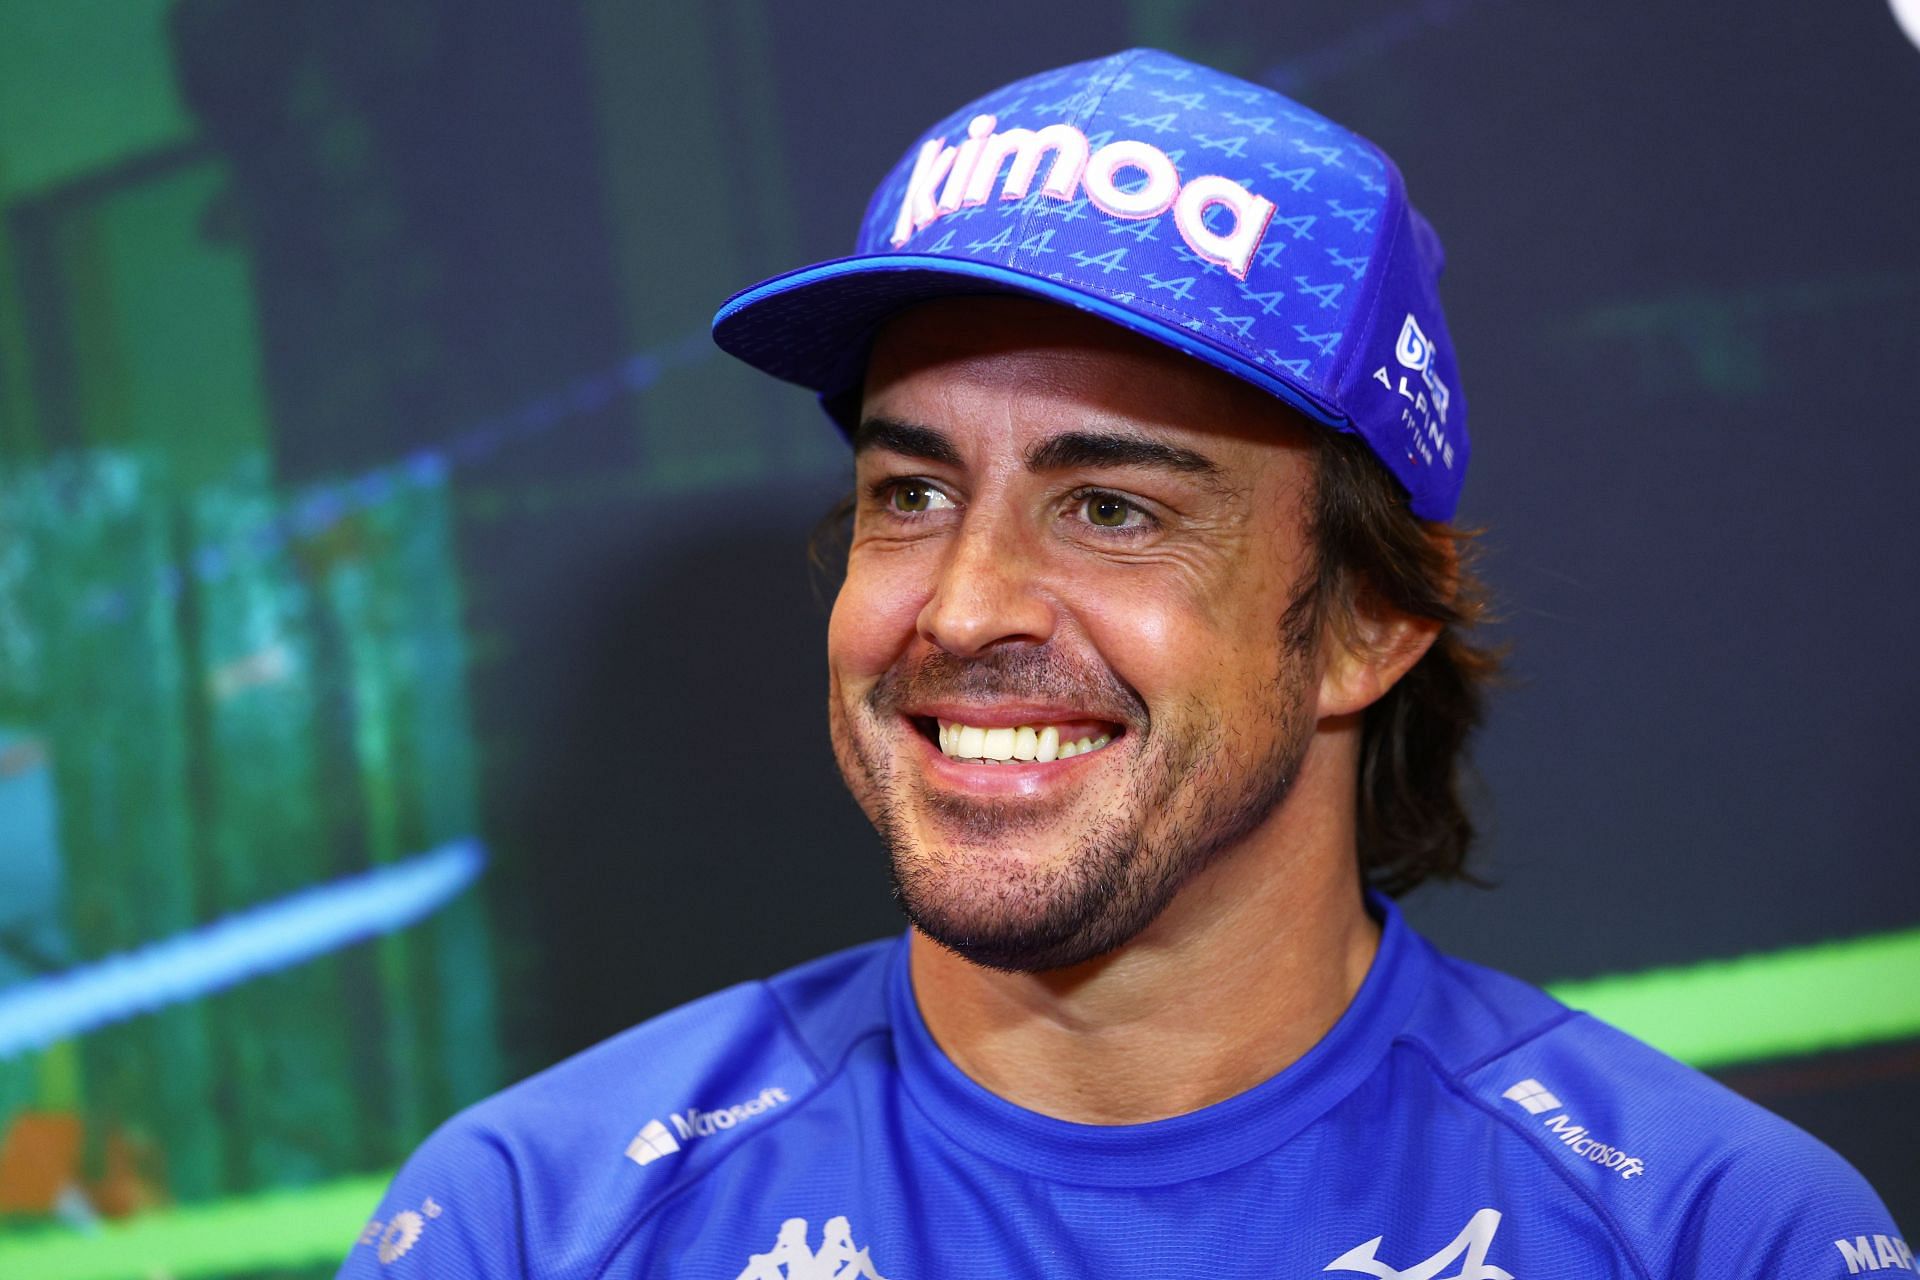 Fernando Alonso was criticized for his spin during Baku qualifying by Alex Albon